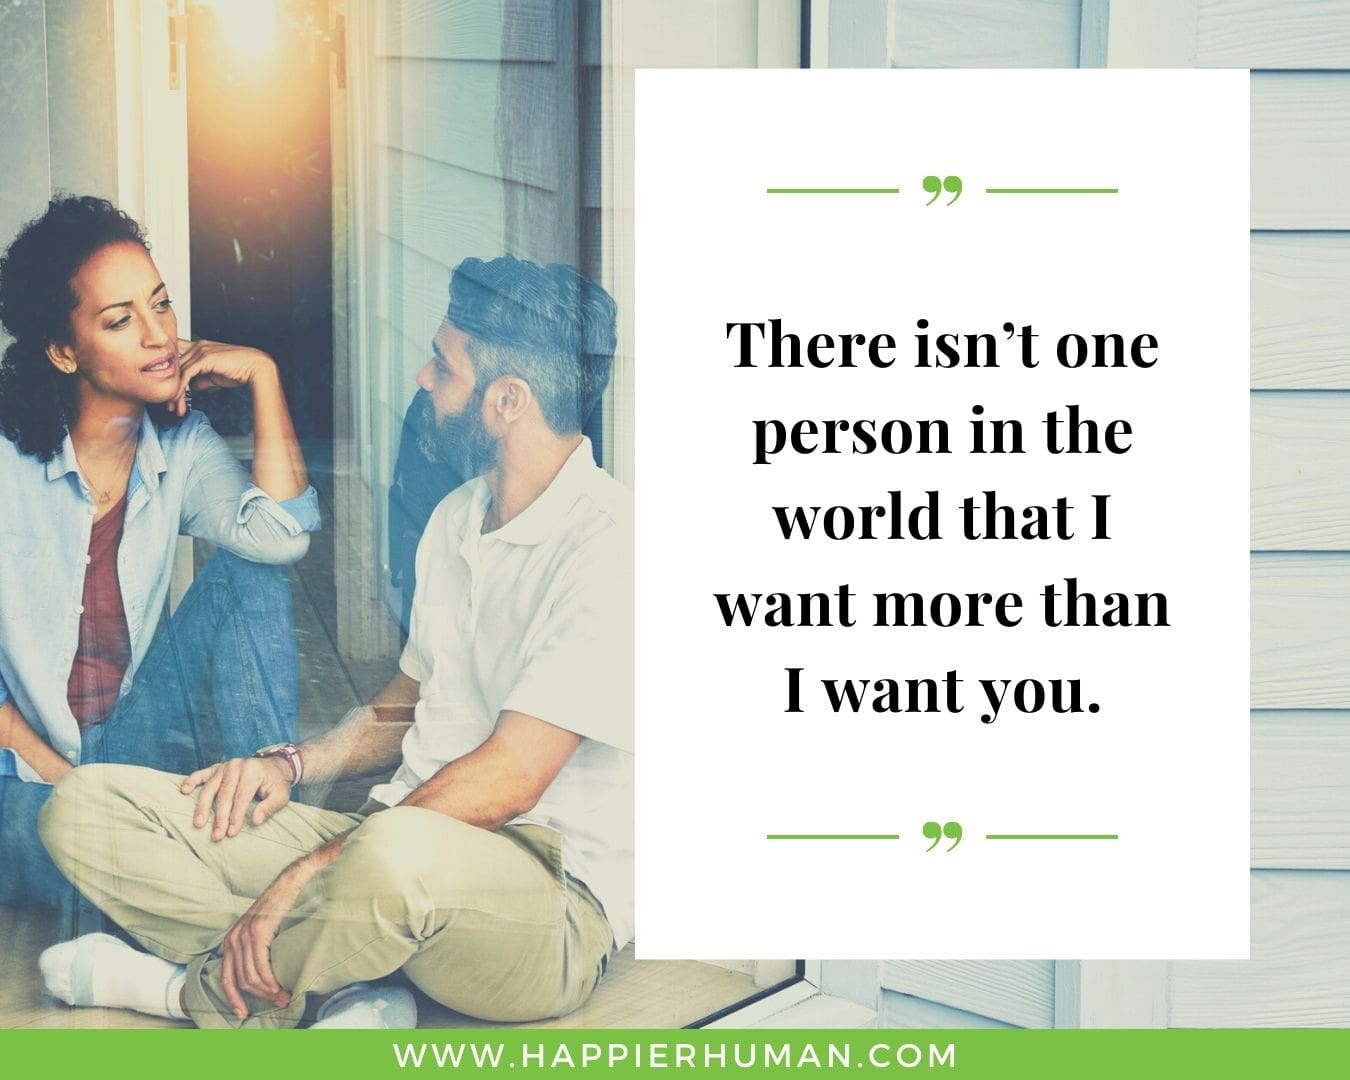 Sweet and Romantic Love Quotes for Her - “There isn’t one person in the world that I want more than I want you.”